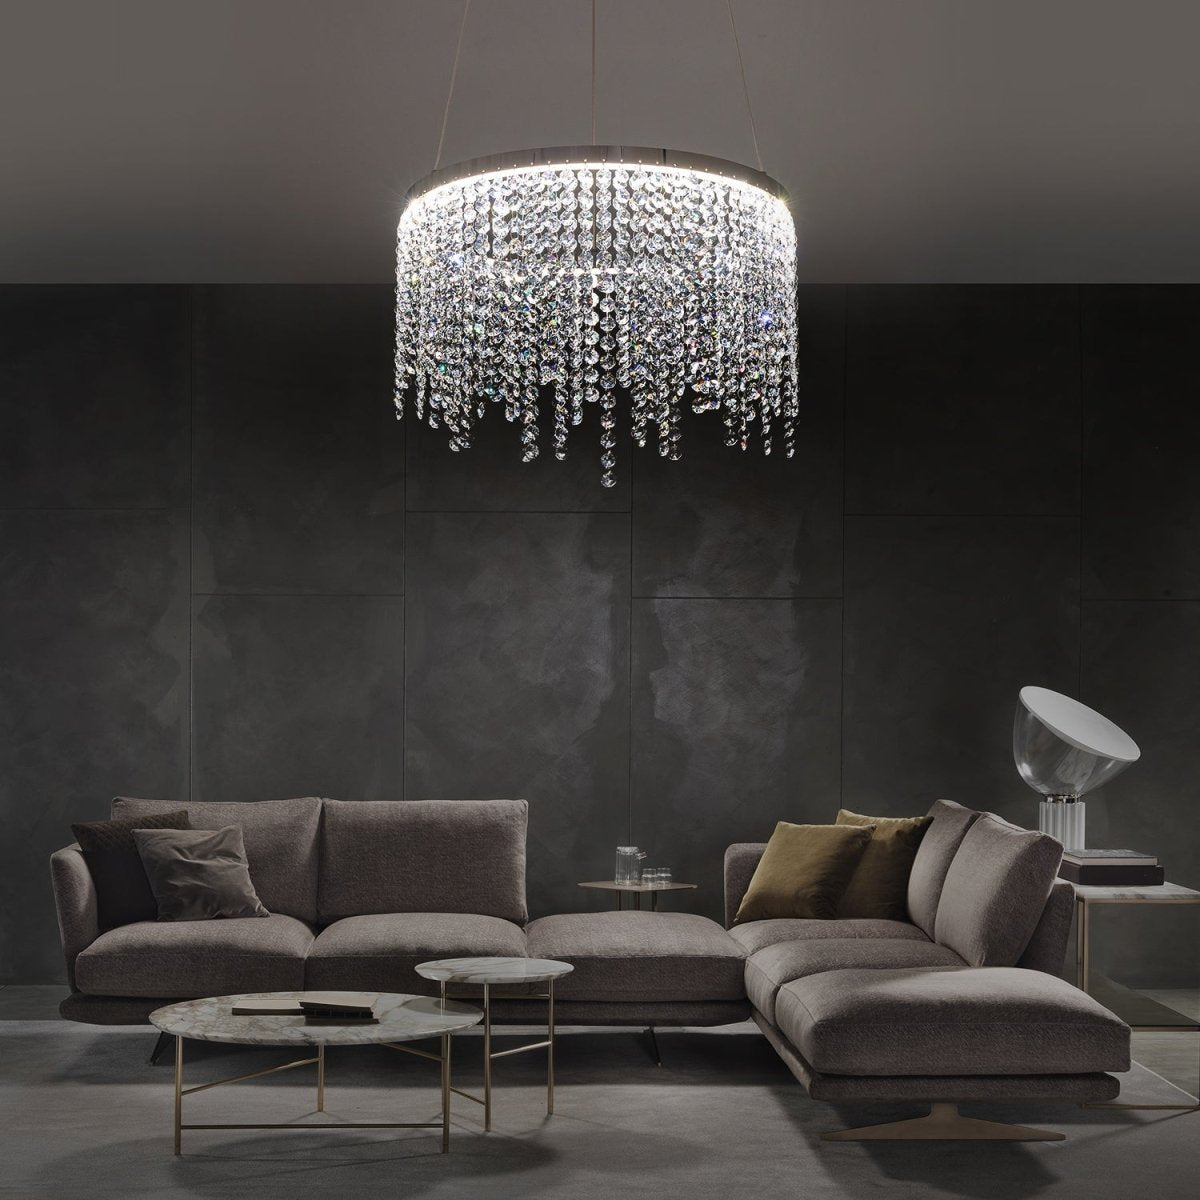 ExBrite Fancy hanging ceiling lamps,Modern Pendant Light,Crystal Chandelier,Height Adjustable,Dining Room Kitchen,Ceiling Hanging Over Table